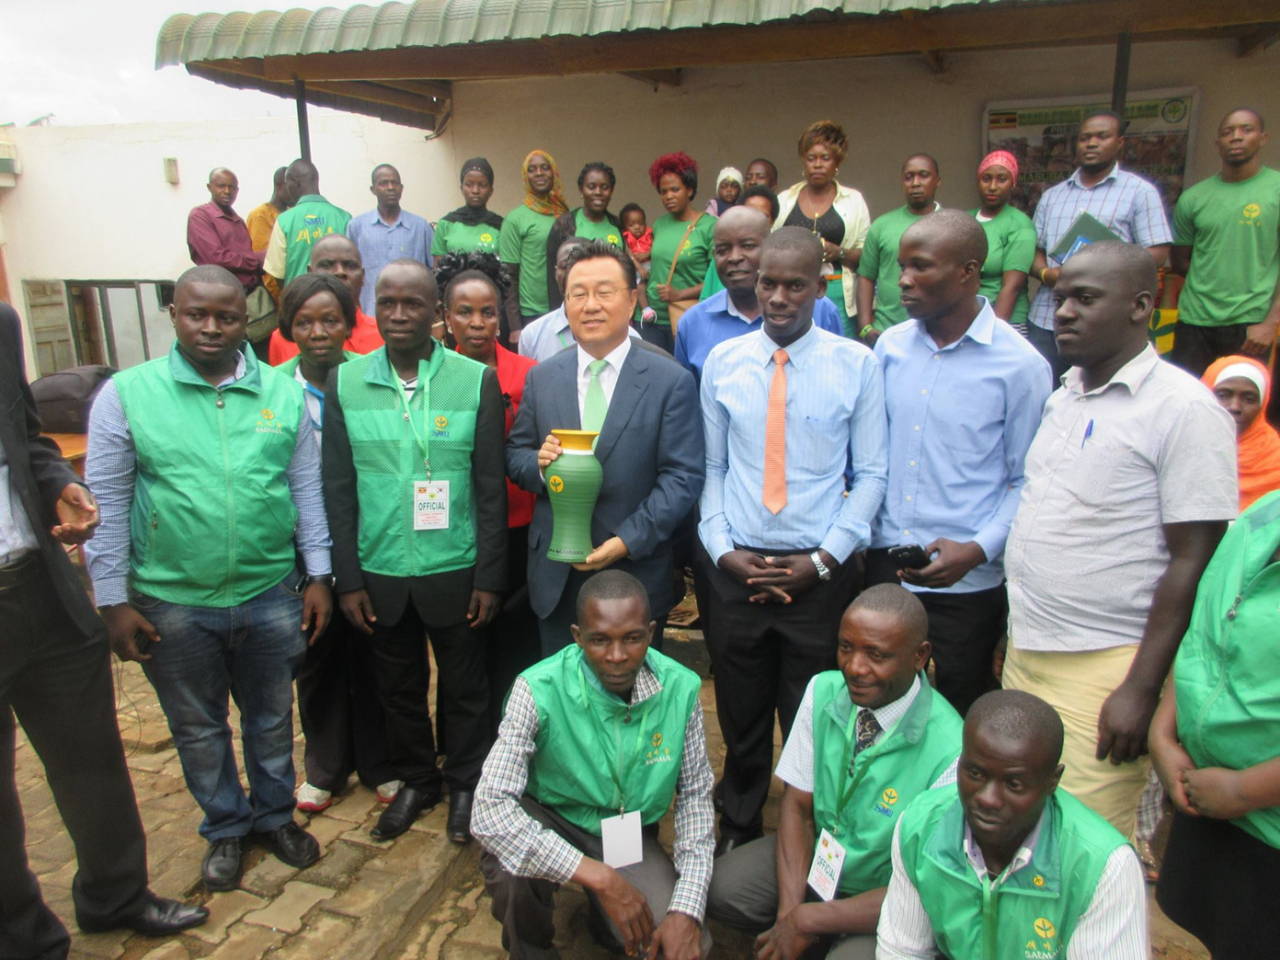 Park Jong-dae (third from left, second row from the front), in his capacity as ambassador to Uganda, attends the annual workshop in December 2016 aimed at transferring South Korea's Saemaul Undong model -- a community-driven development program from the 1970s -- to Uganda. The event took place at the Kyengera Country Resort, Uganda. (Photo courtesy of Park Jong-dae)